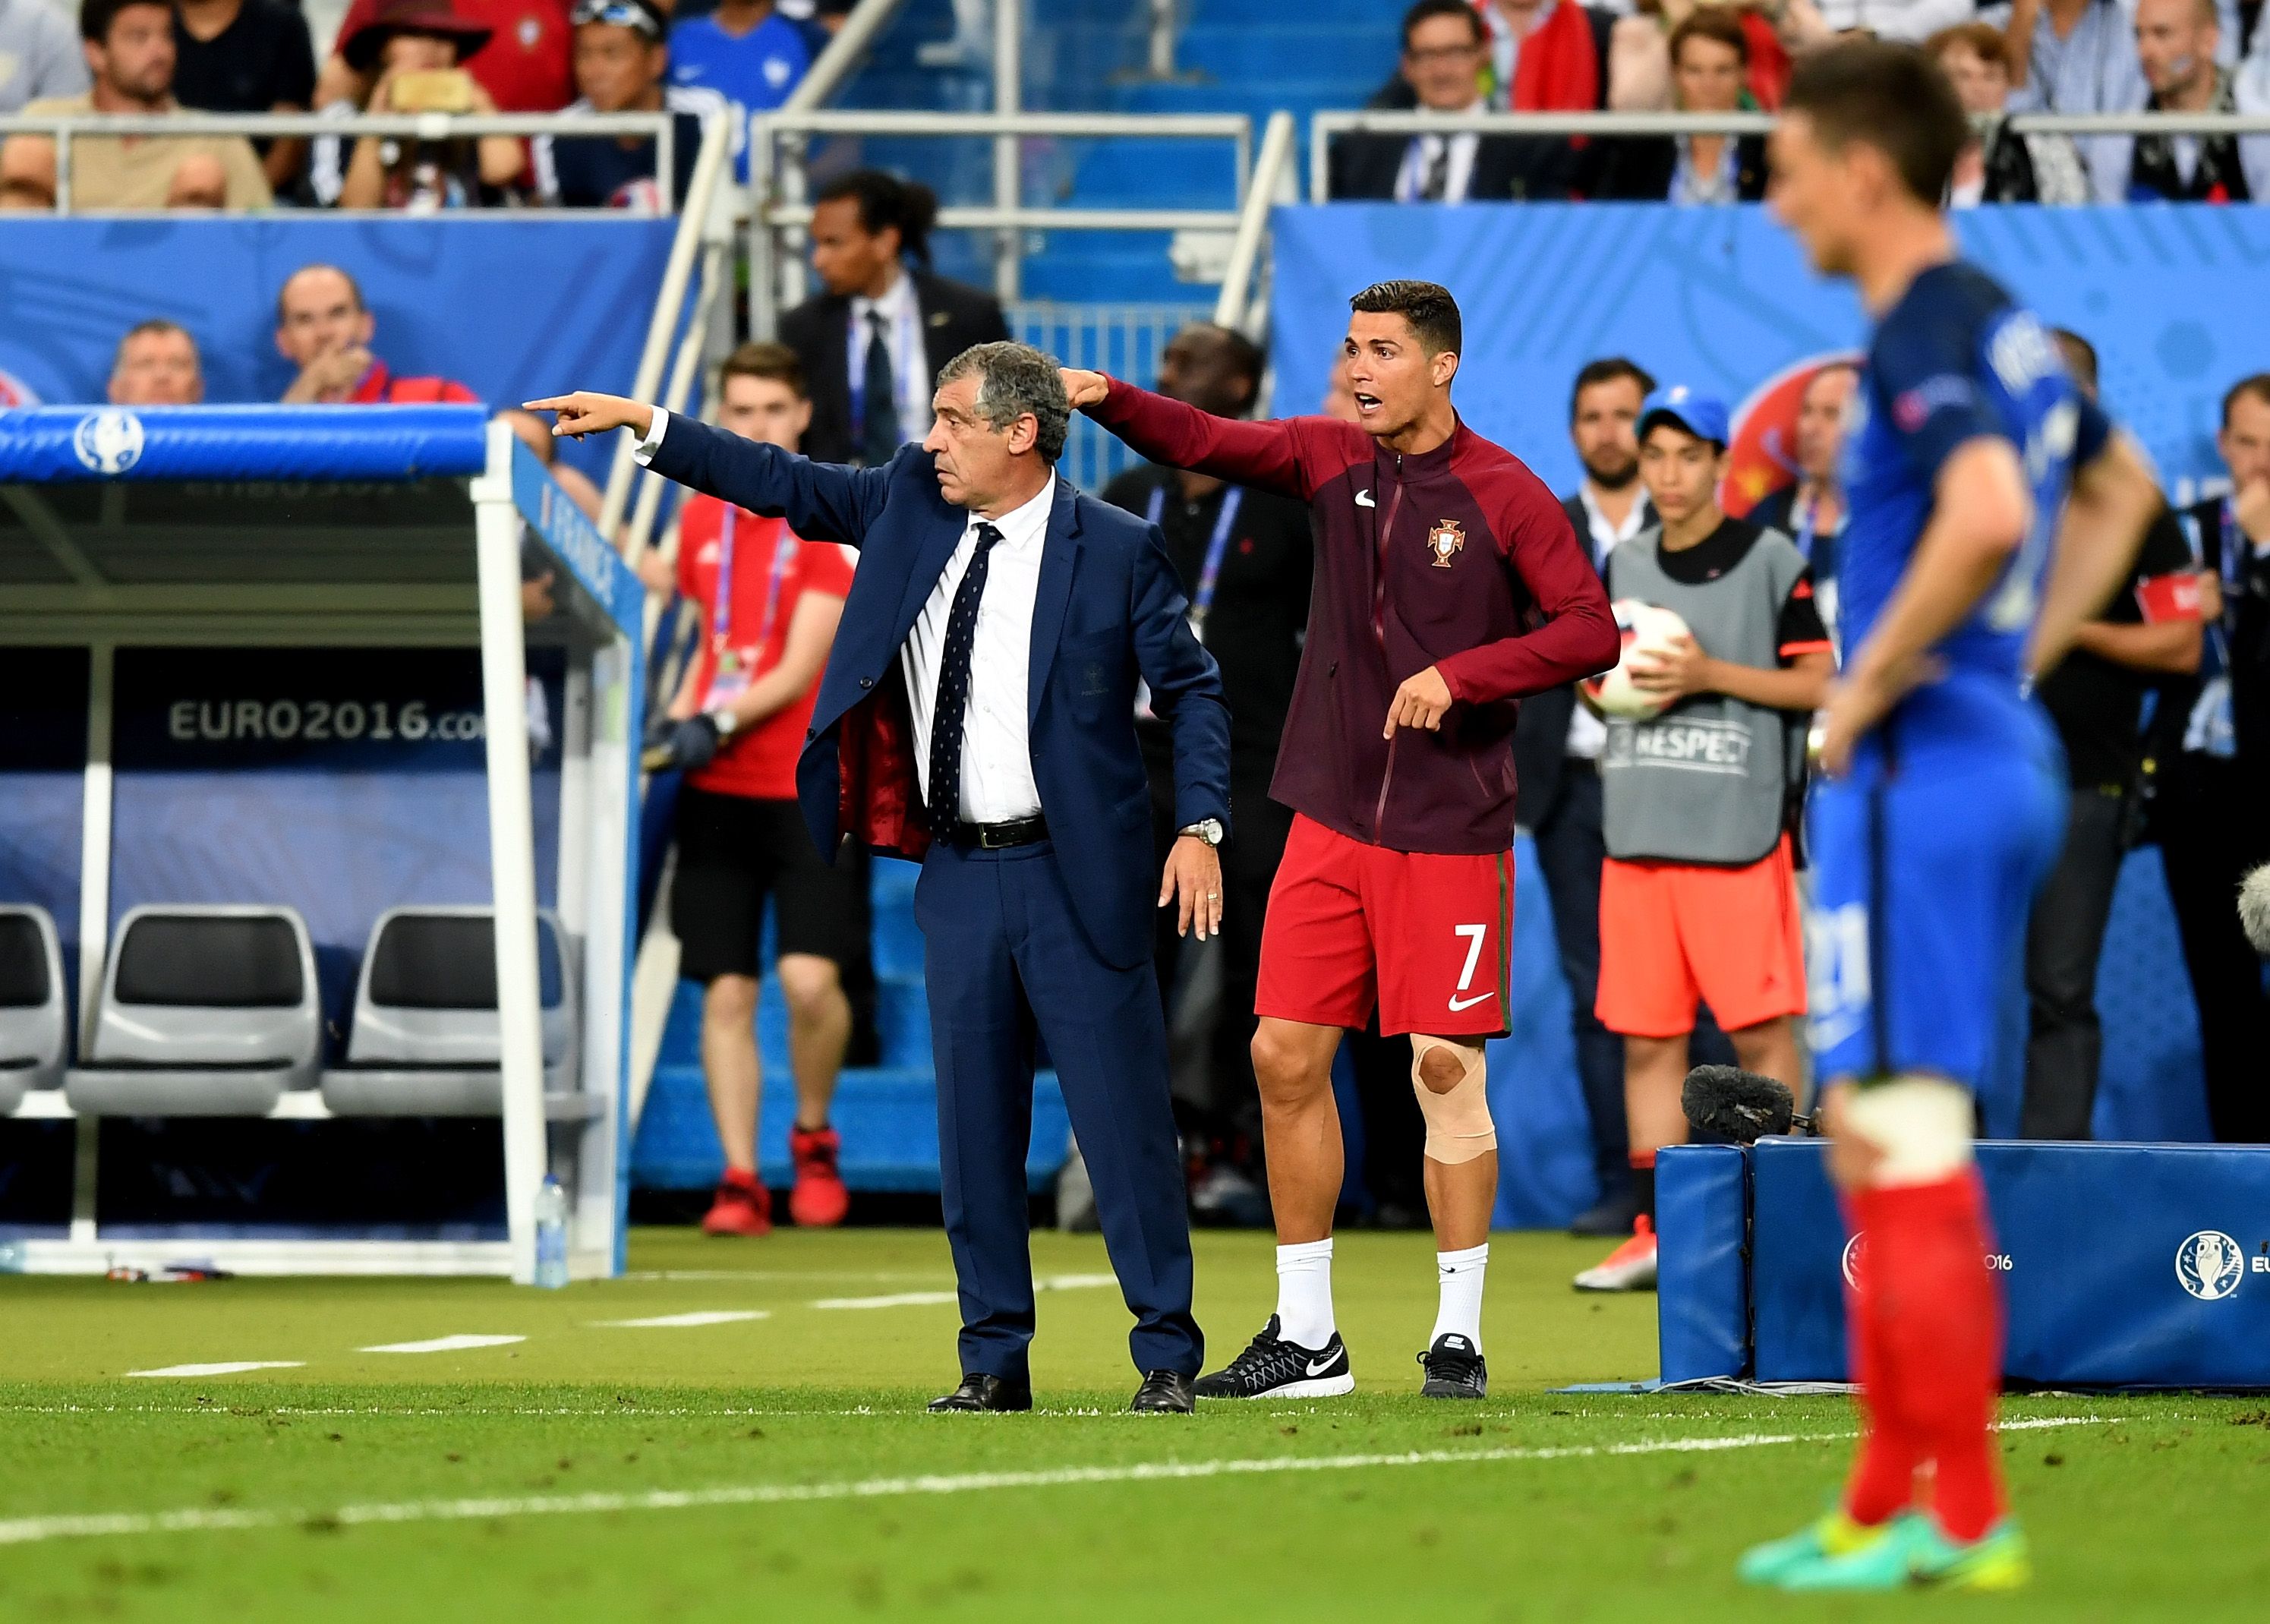 PARIS, FRANCE - JULY 10: Cristiano Ronaldo and manager Fernando Santos gestures on the touchline during the UEFA EURO 2016 Final match between Portugal and France at Stade de France on July 10, 2016 in Paris, France. (Photo by Michael Regan/Getty Images)